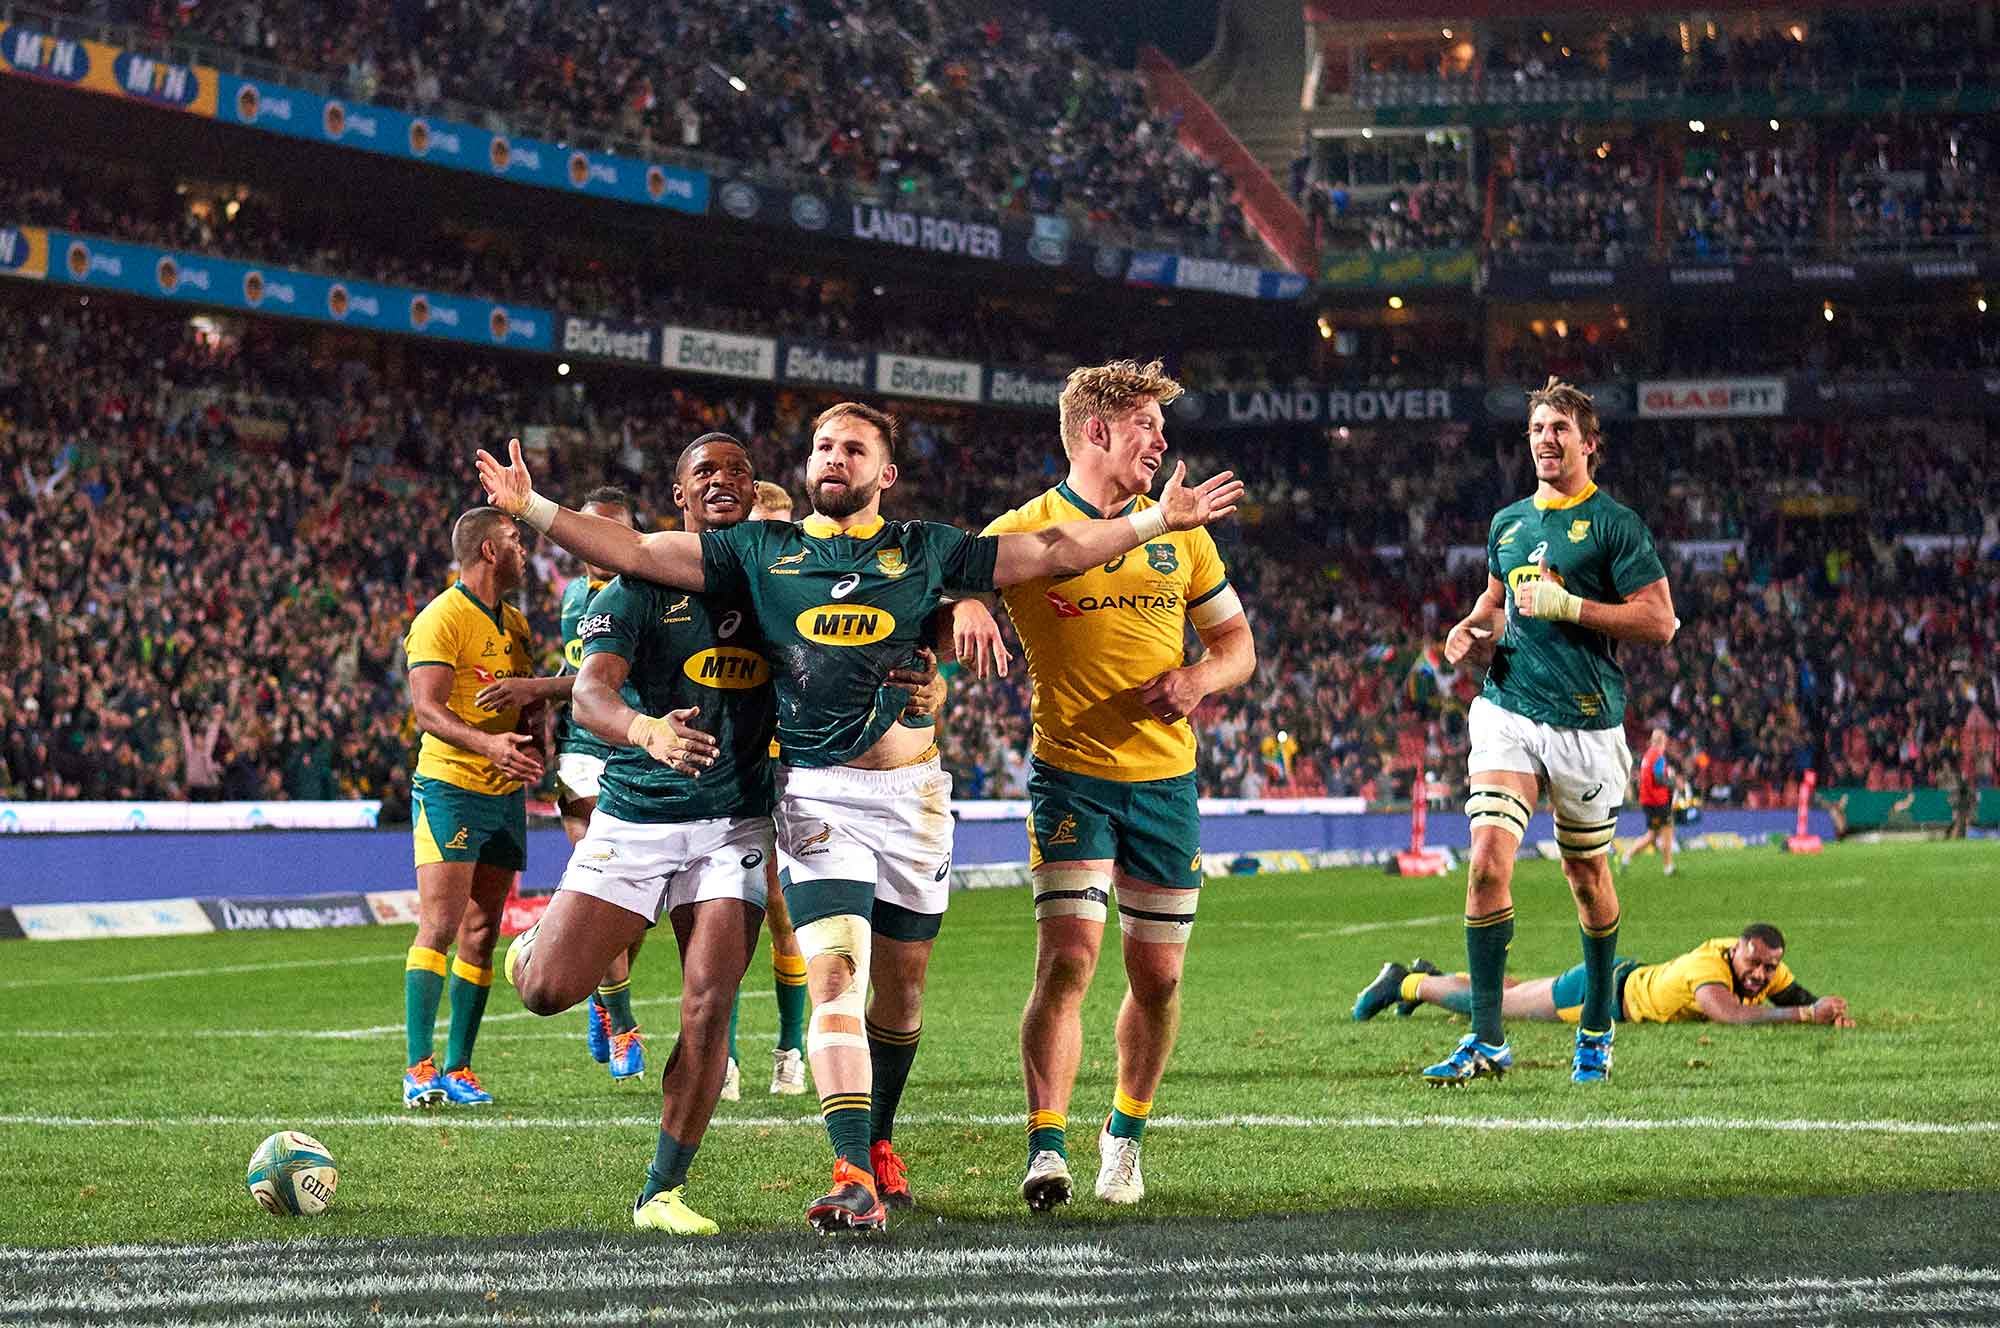 Unbeaten rugby world cup champions score try against Australia in friendly warm up game held at Loftus Versveld South Africa